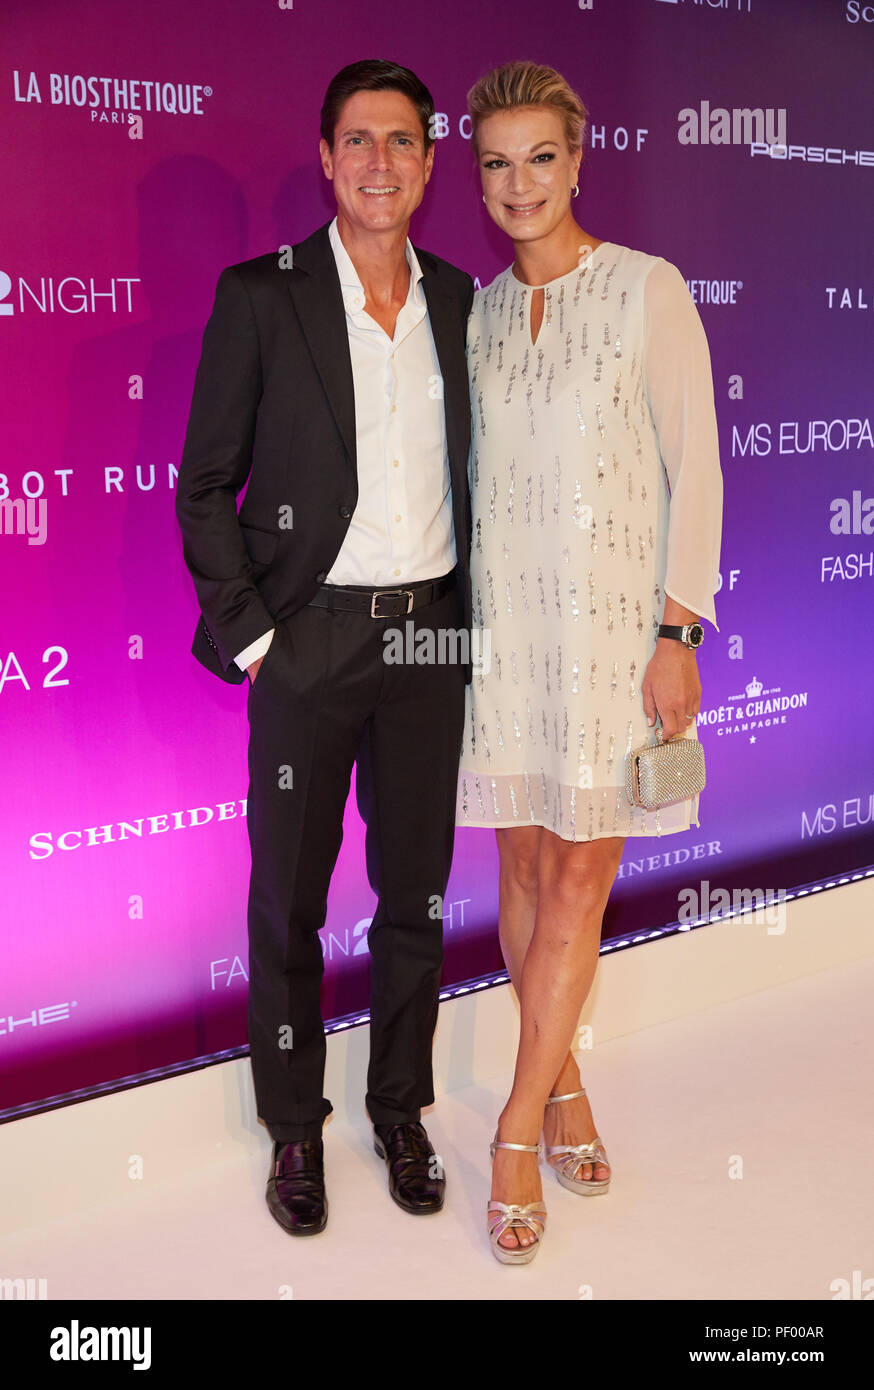 Hamburg, Germany. 17th Aug, 2018. Maria Hoefl-Riesch, former German ski racer, and her husband Marcus Höfl stand on the red carpet of the "Fashion2Night" on the MS Europa. Credit: Georg Wendt/dpa/Alamy Live News Stock Photo